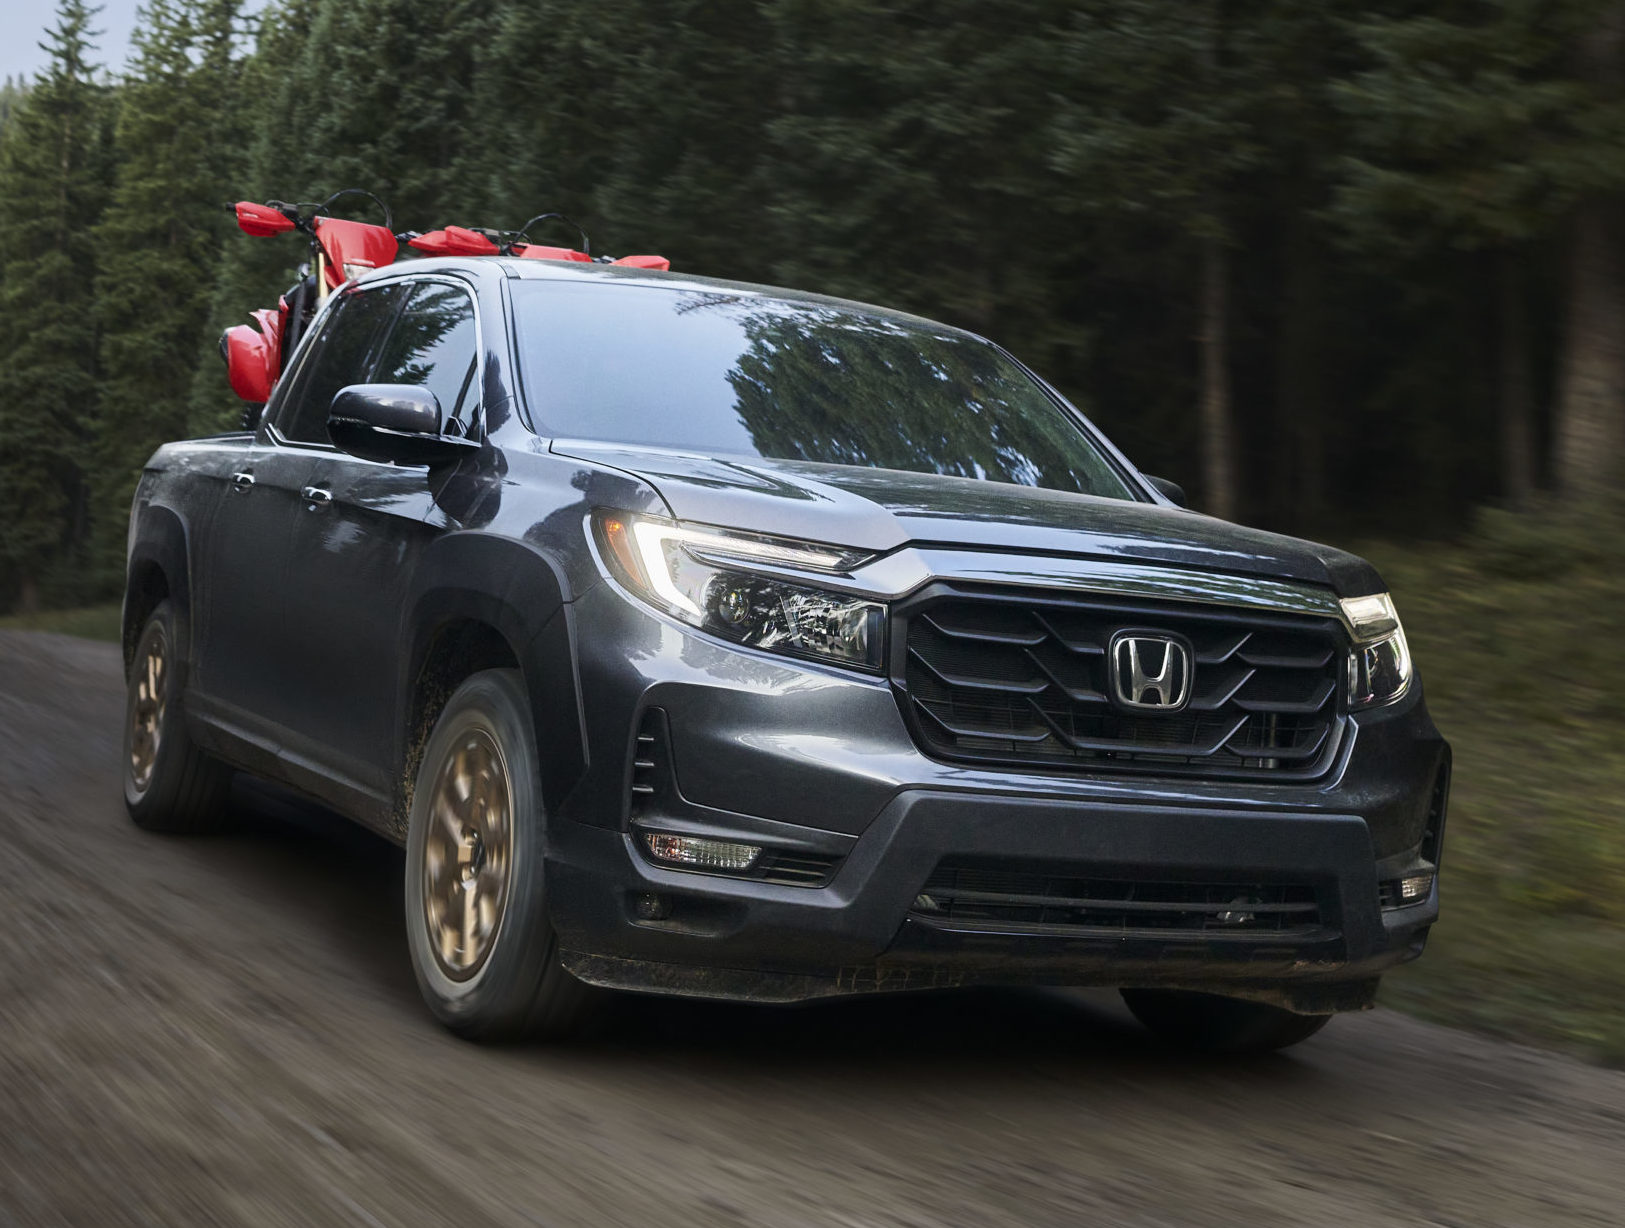 Honda: 2021 Ridgeline redesign adds air vents, extends color on fascia |  Repairer Driven News